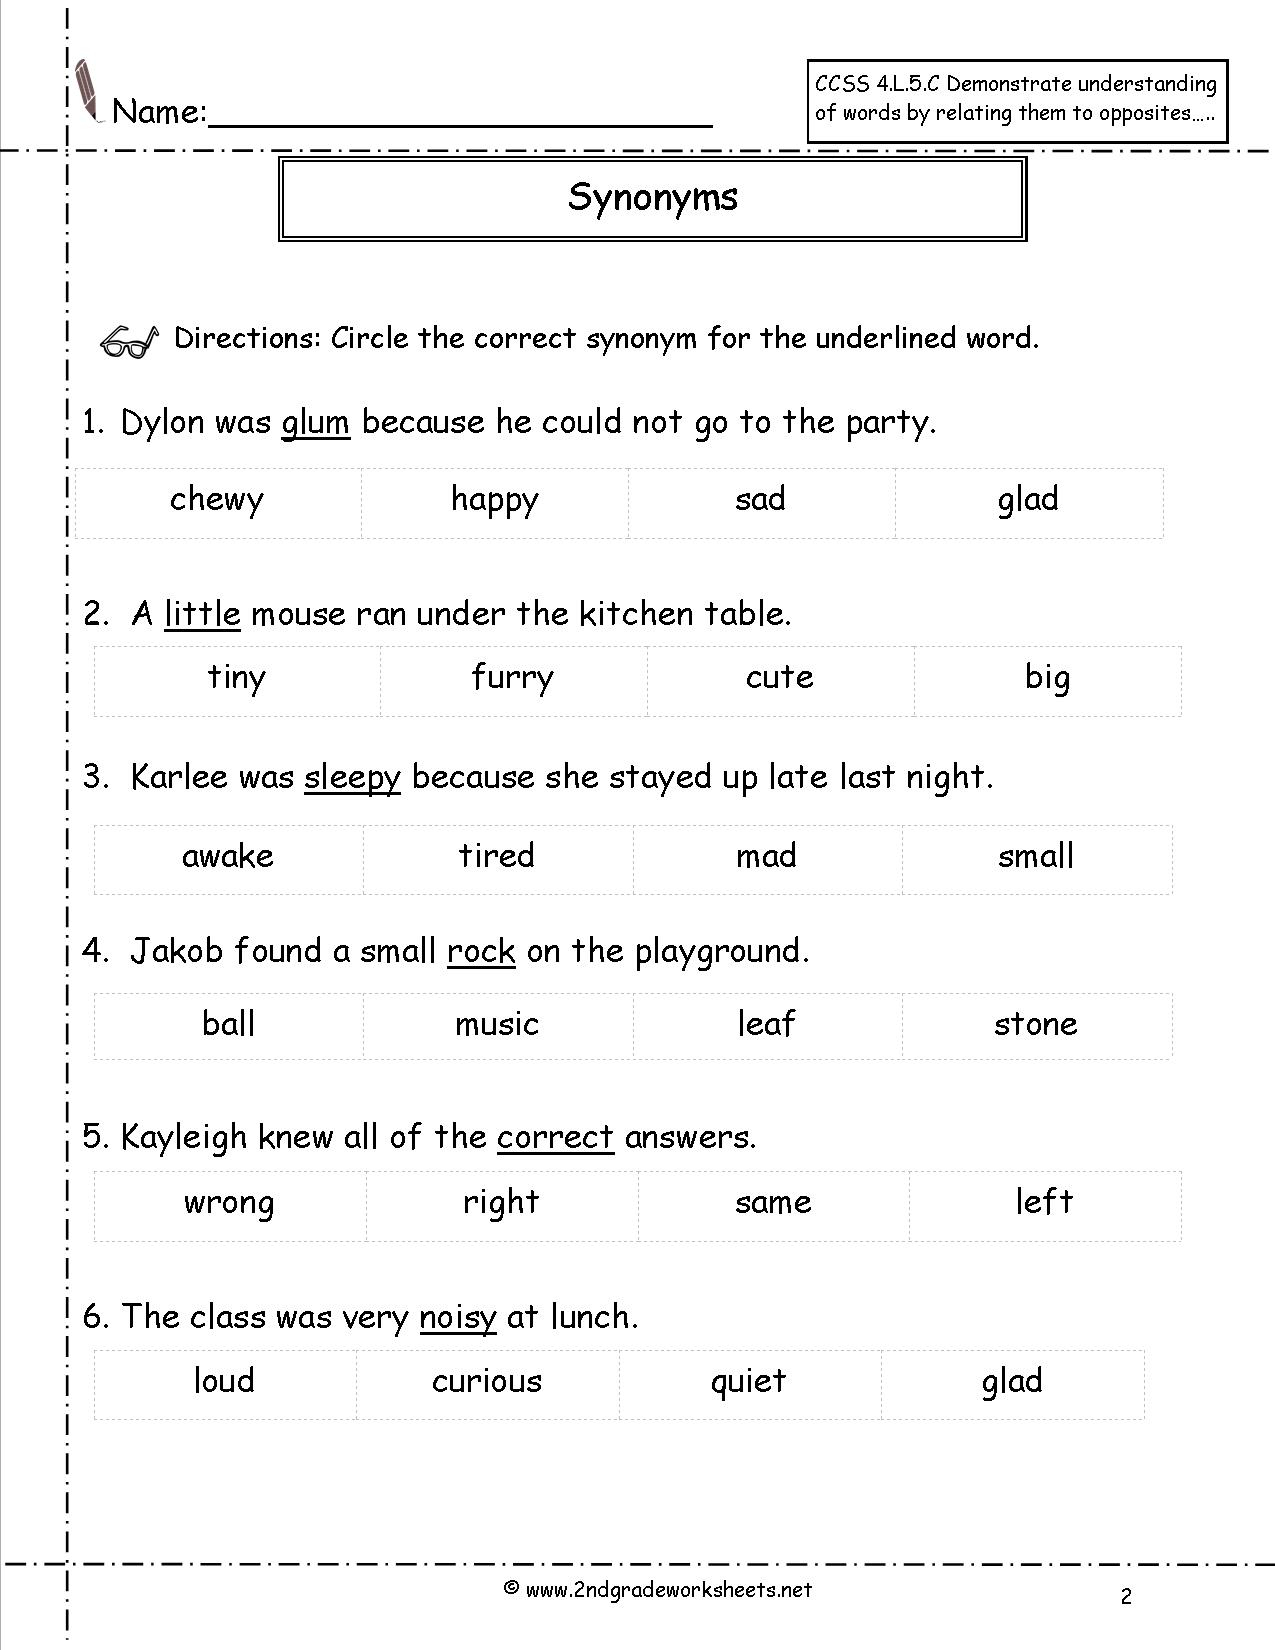 Synonyms And Antonyms Worksheets | Free Printable Worksheets Synonyms Antonyms And Homonyms